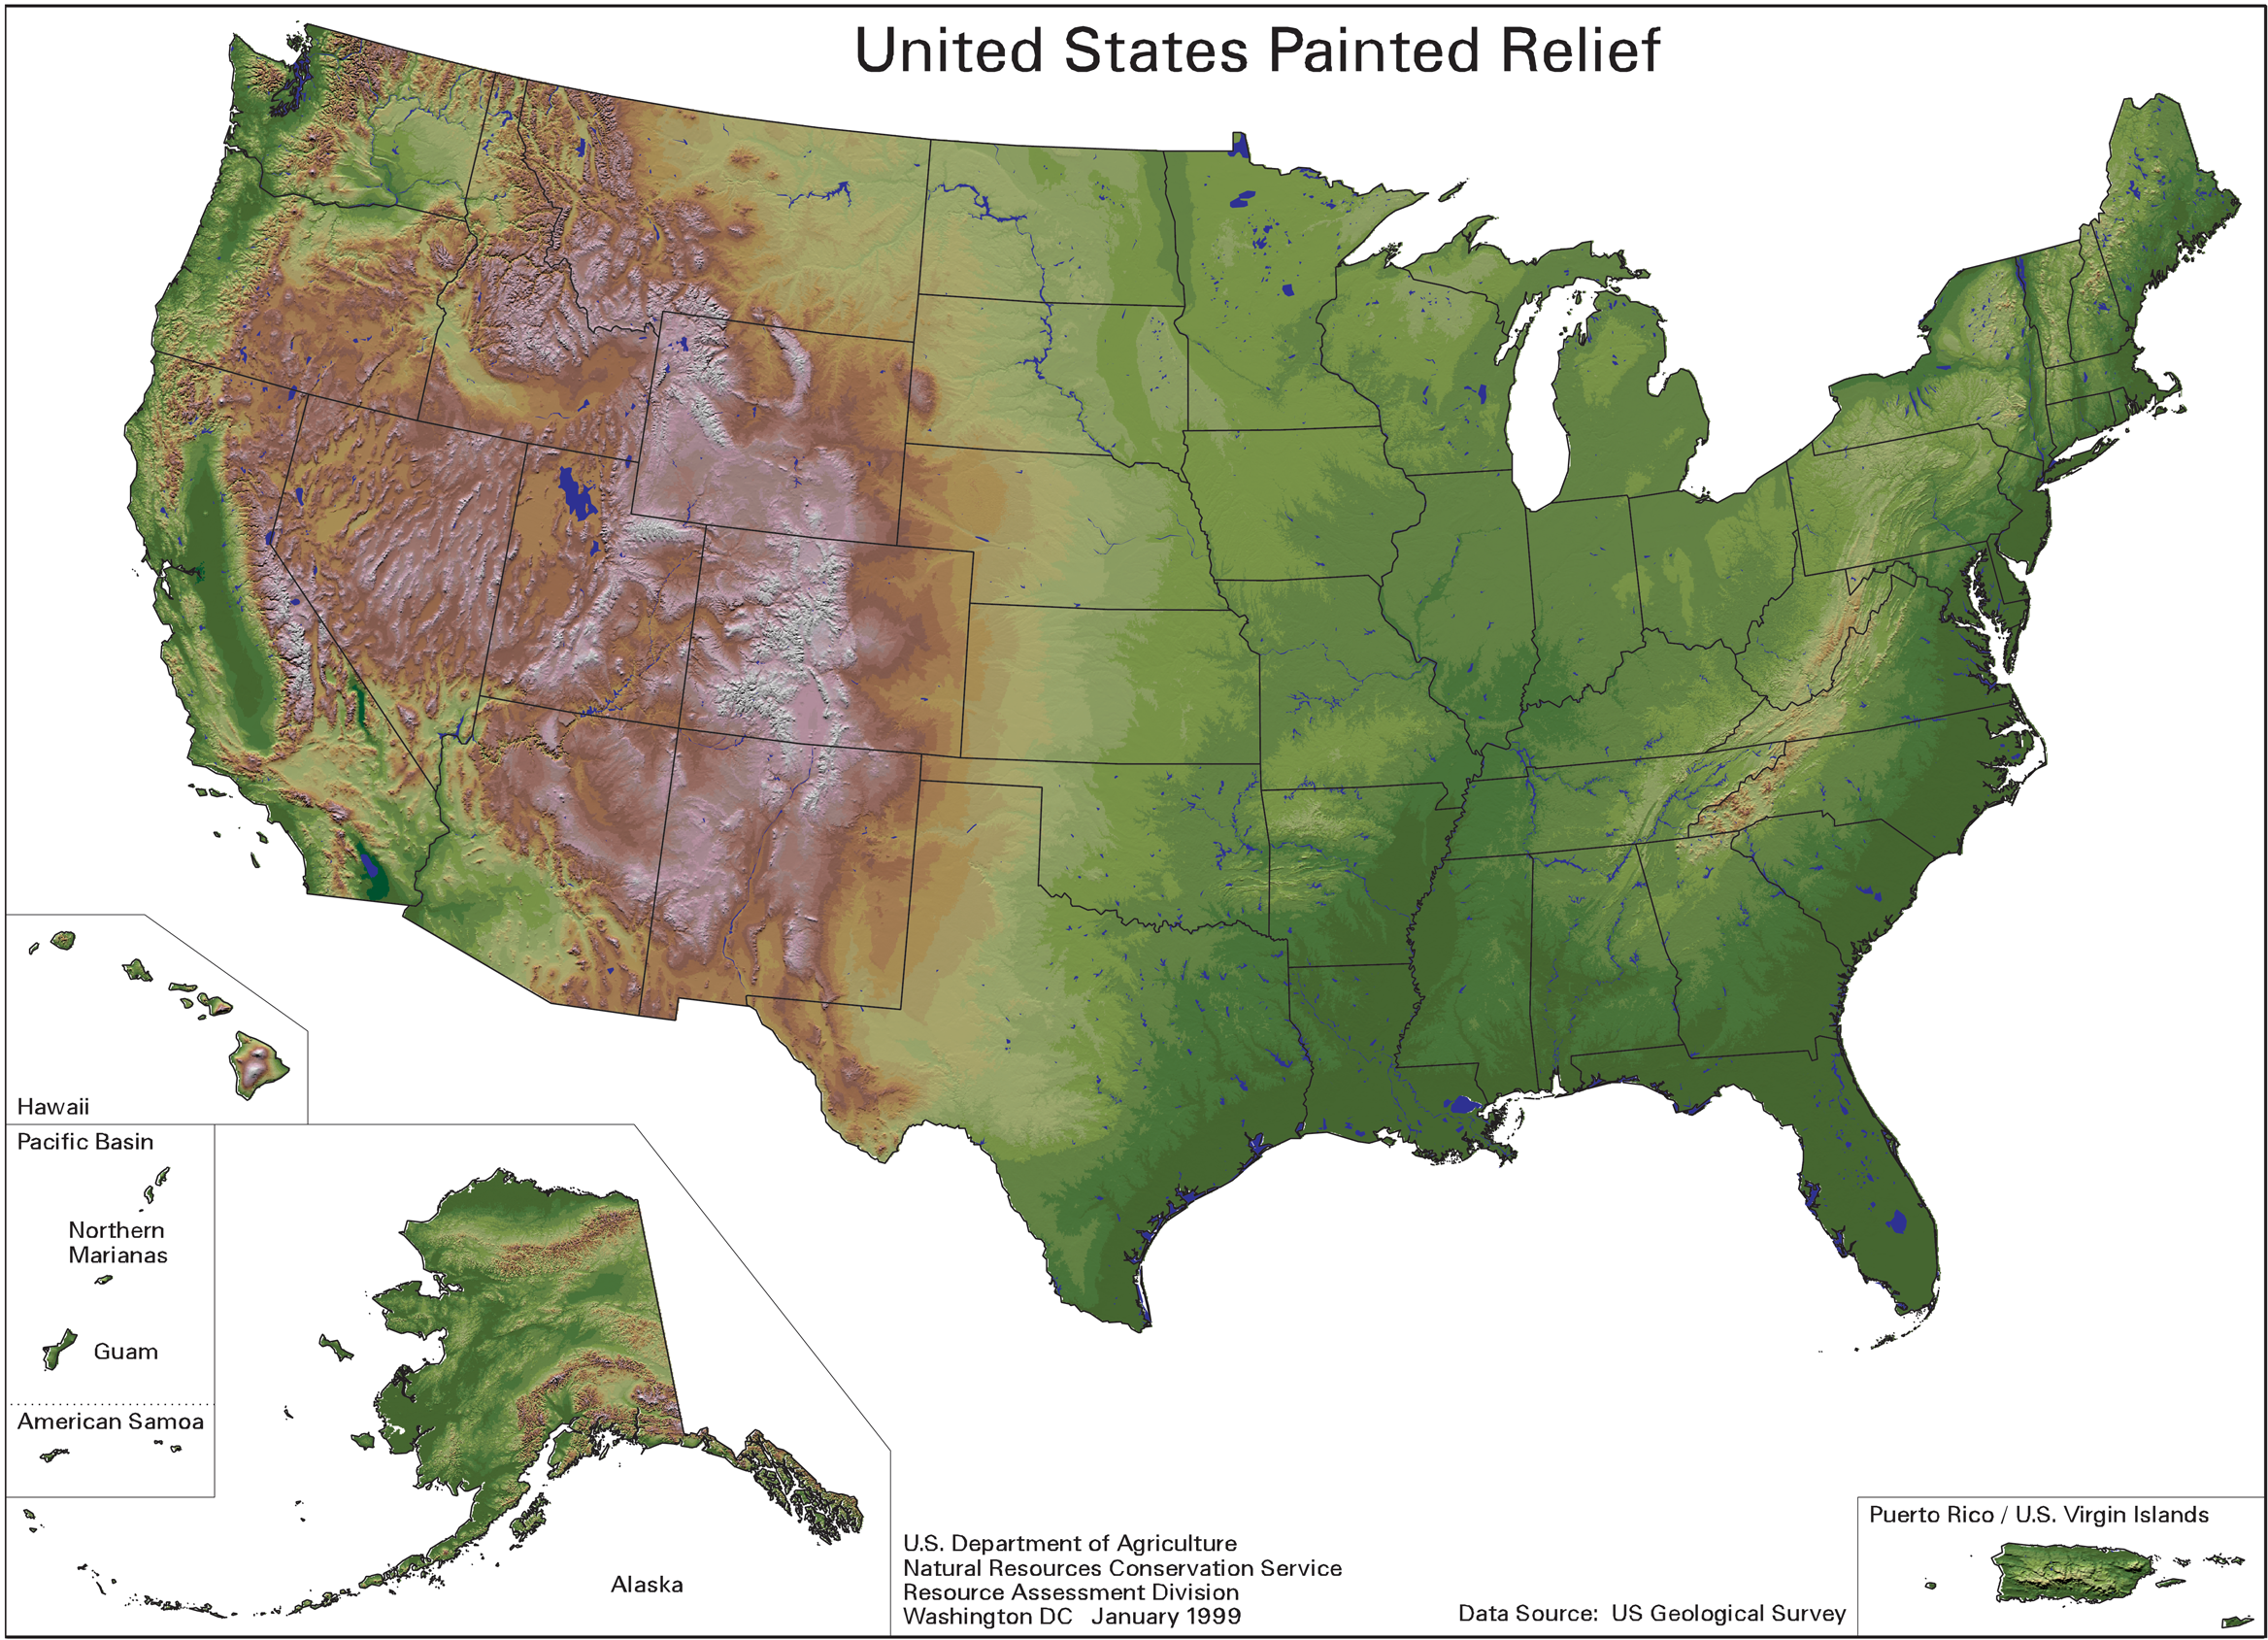 United States painted relief map